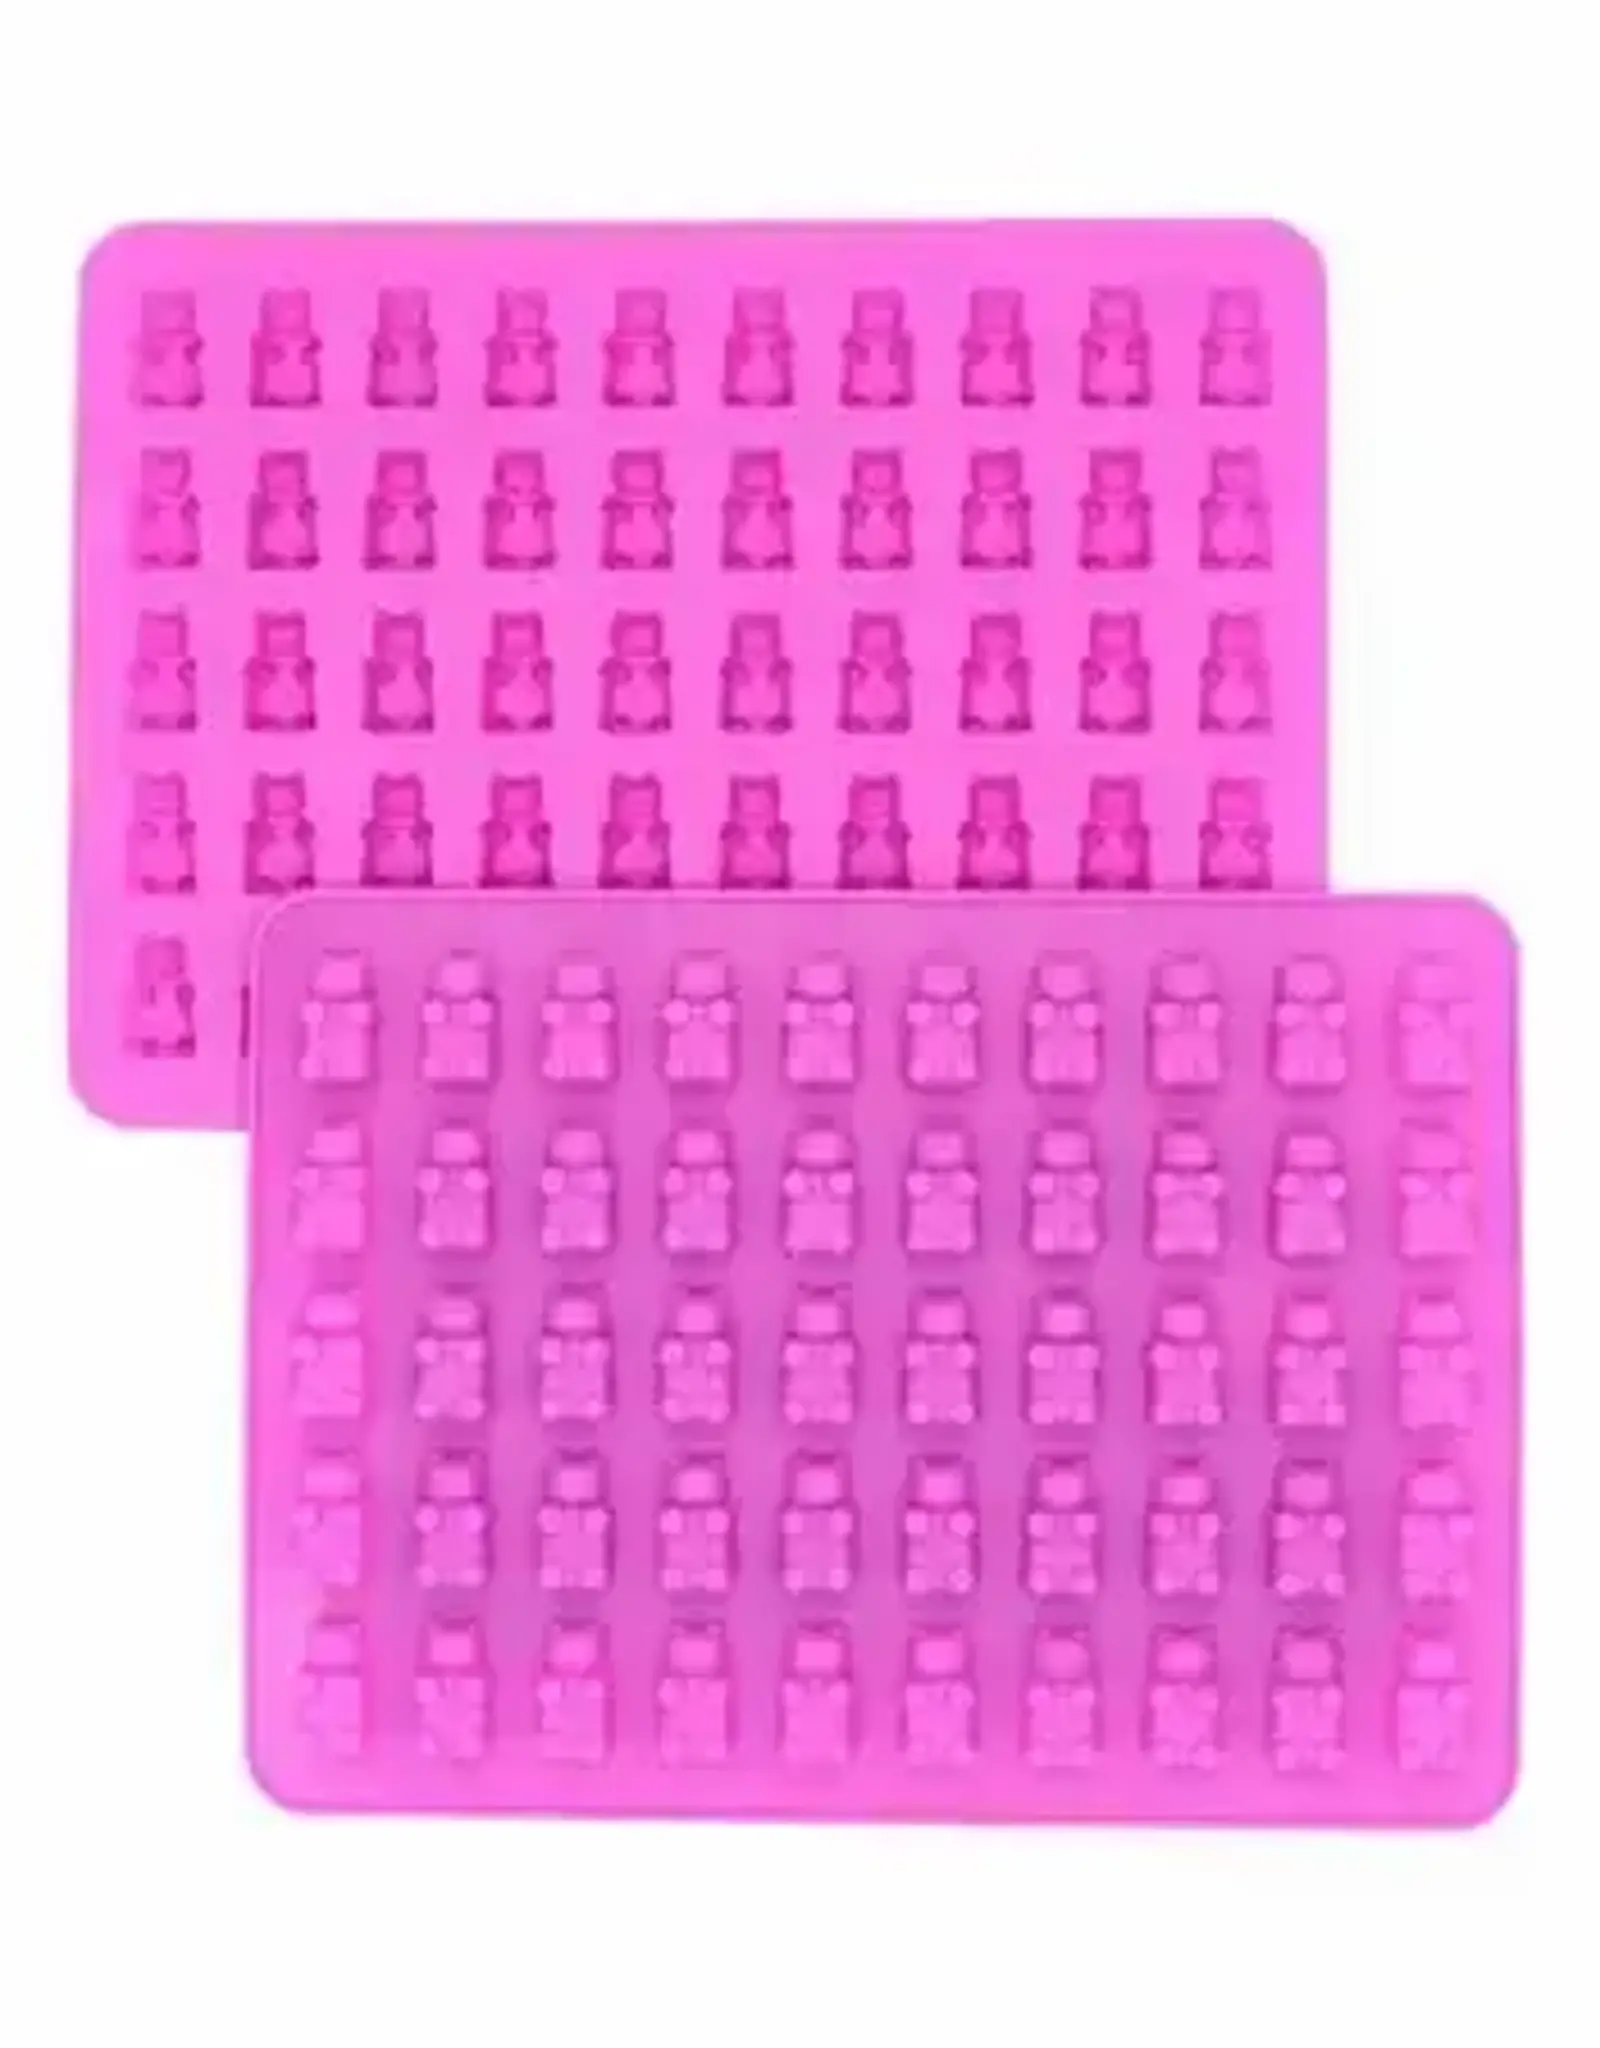 SILICONE GUMMY BEAR MOLD 2 Pack